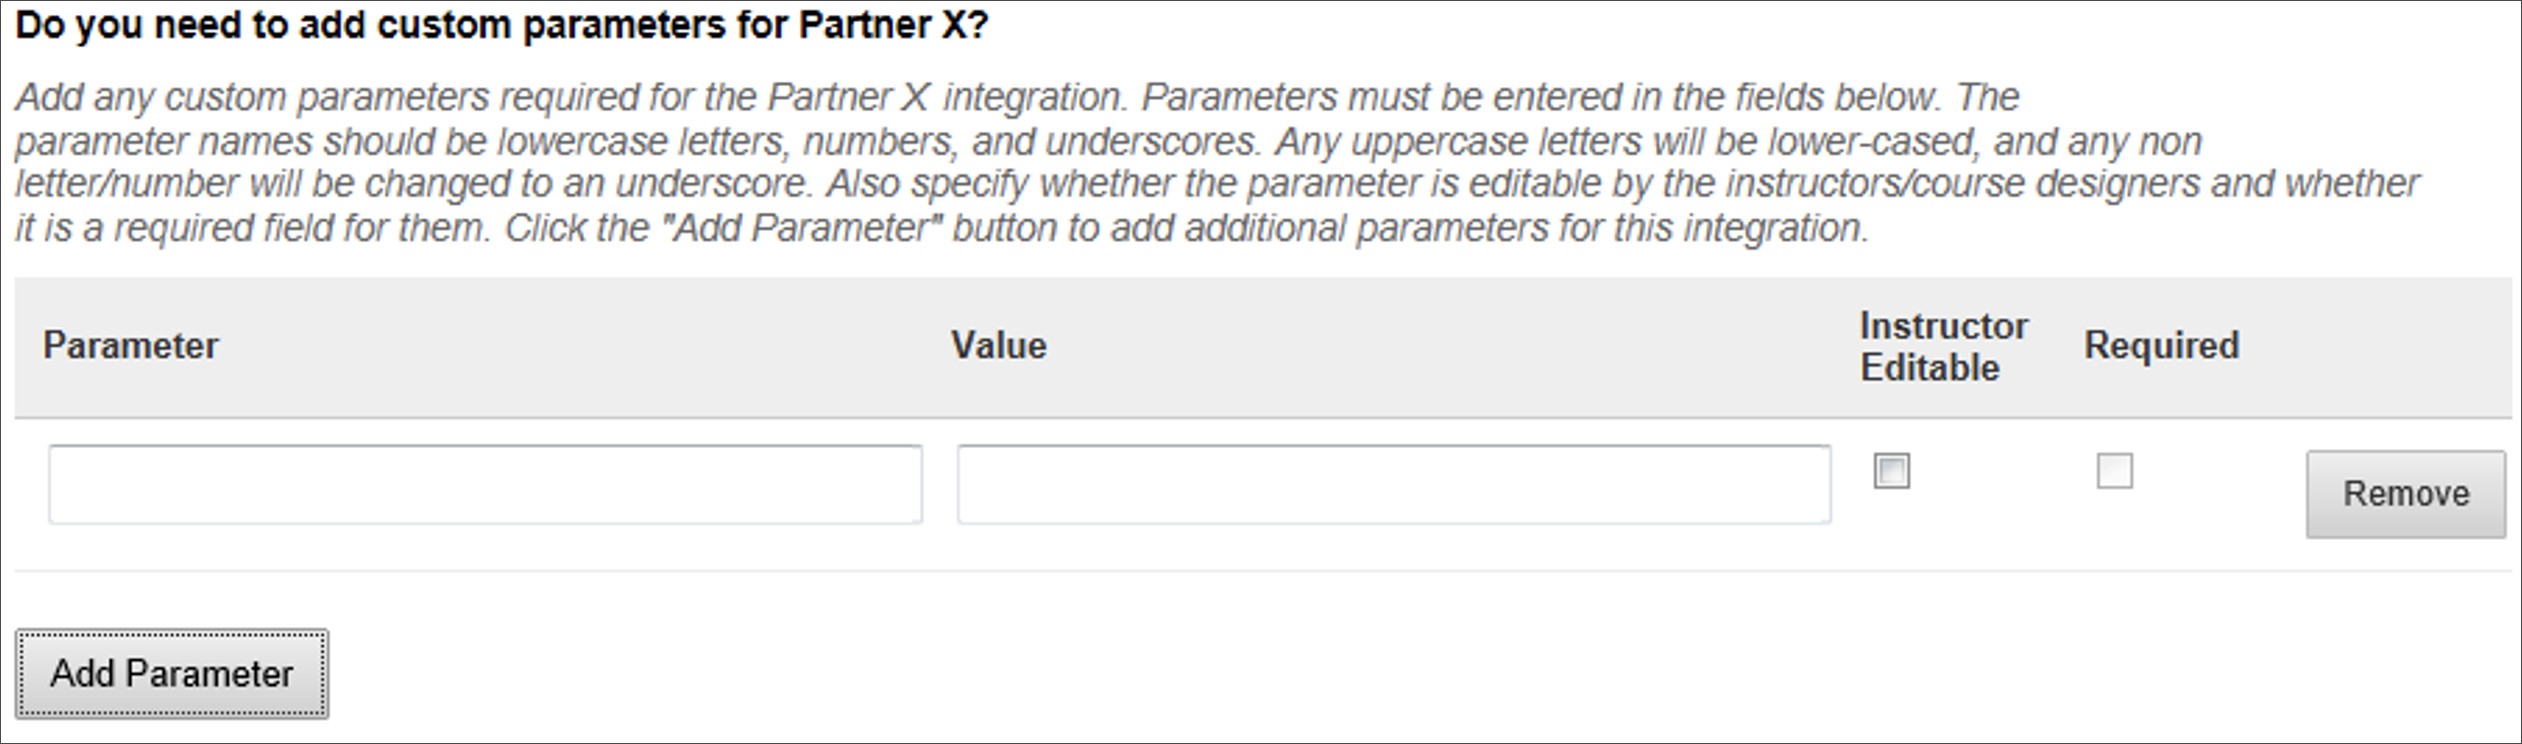 Add custom parameters for a given partner section